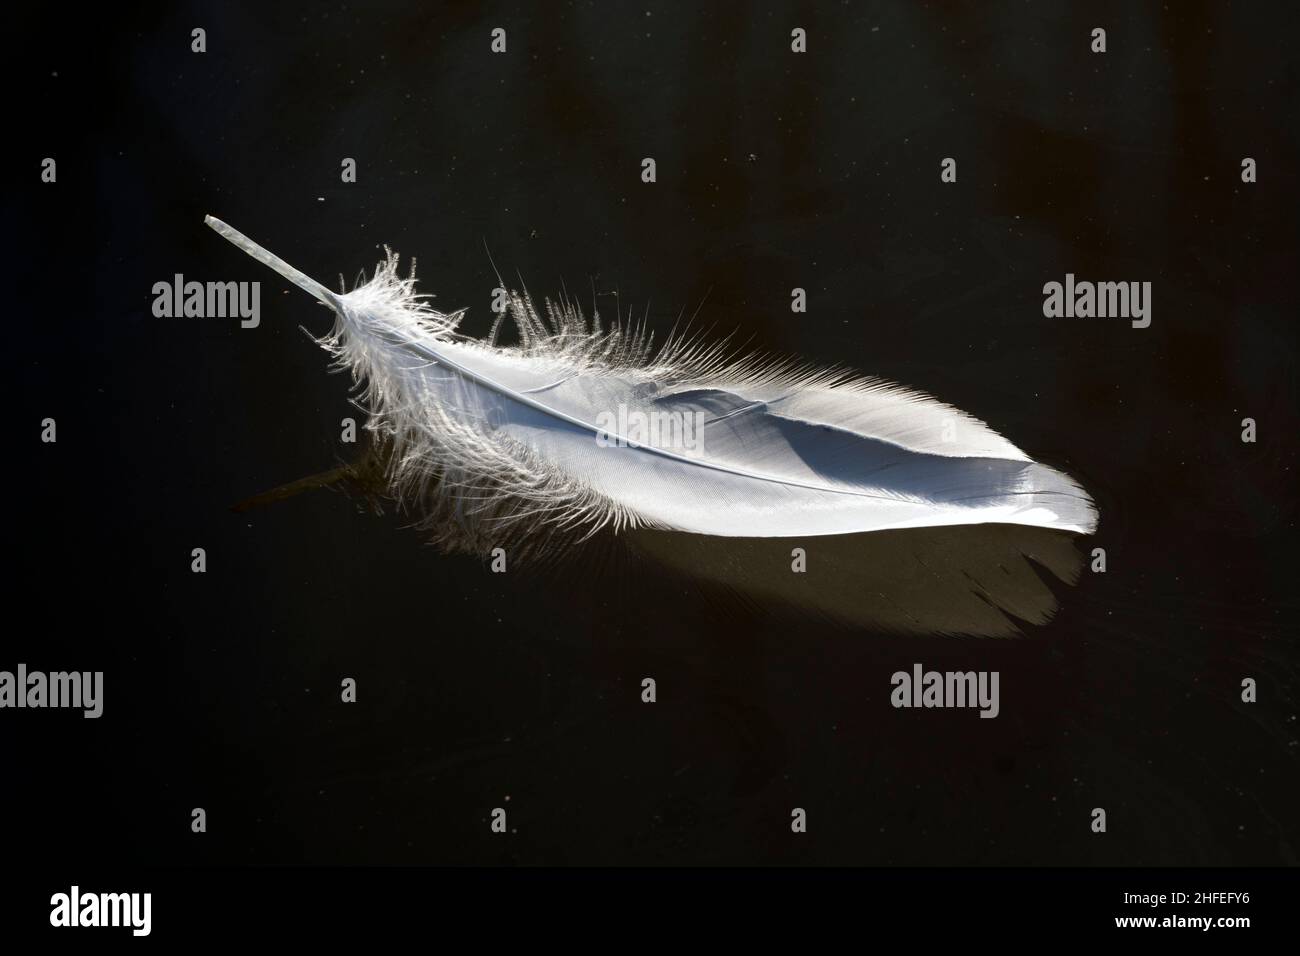 A swan`s feather floating on water Stock Photo